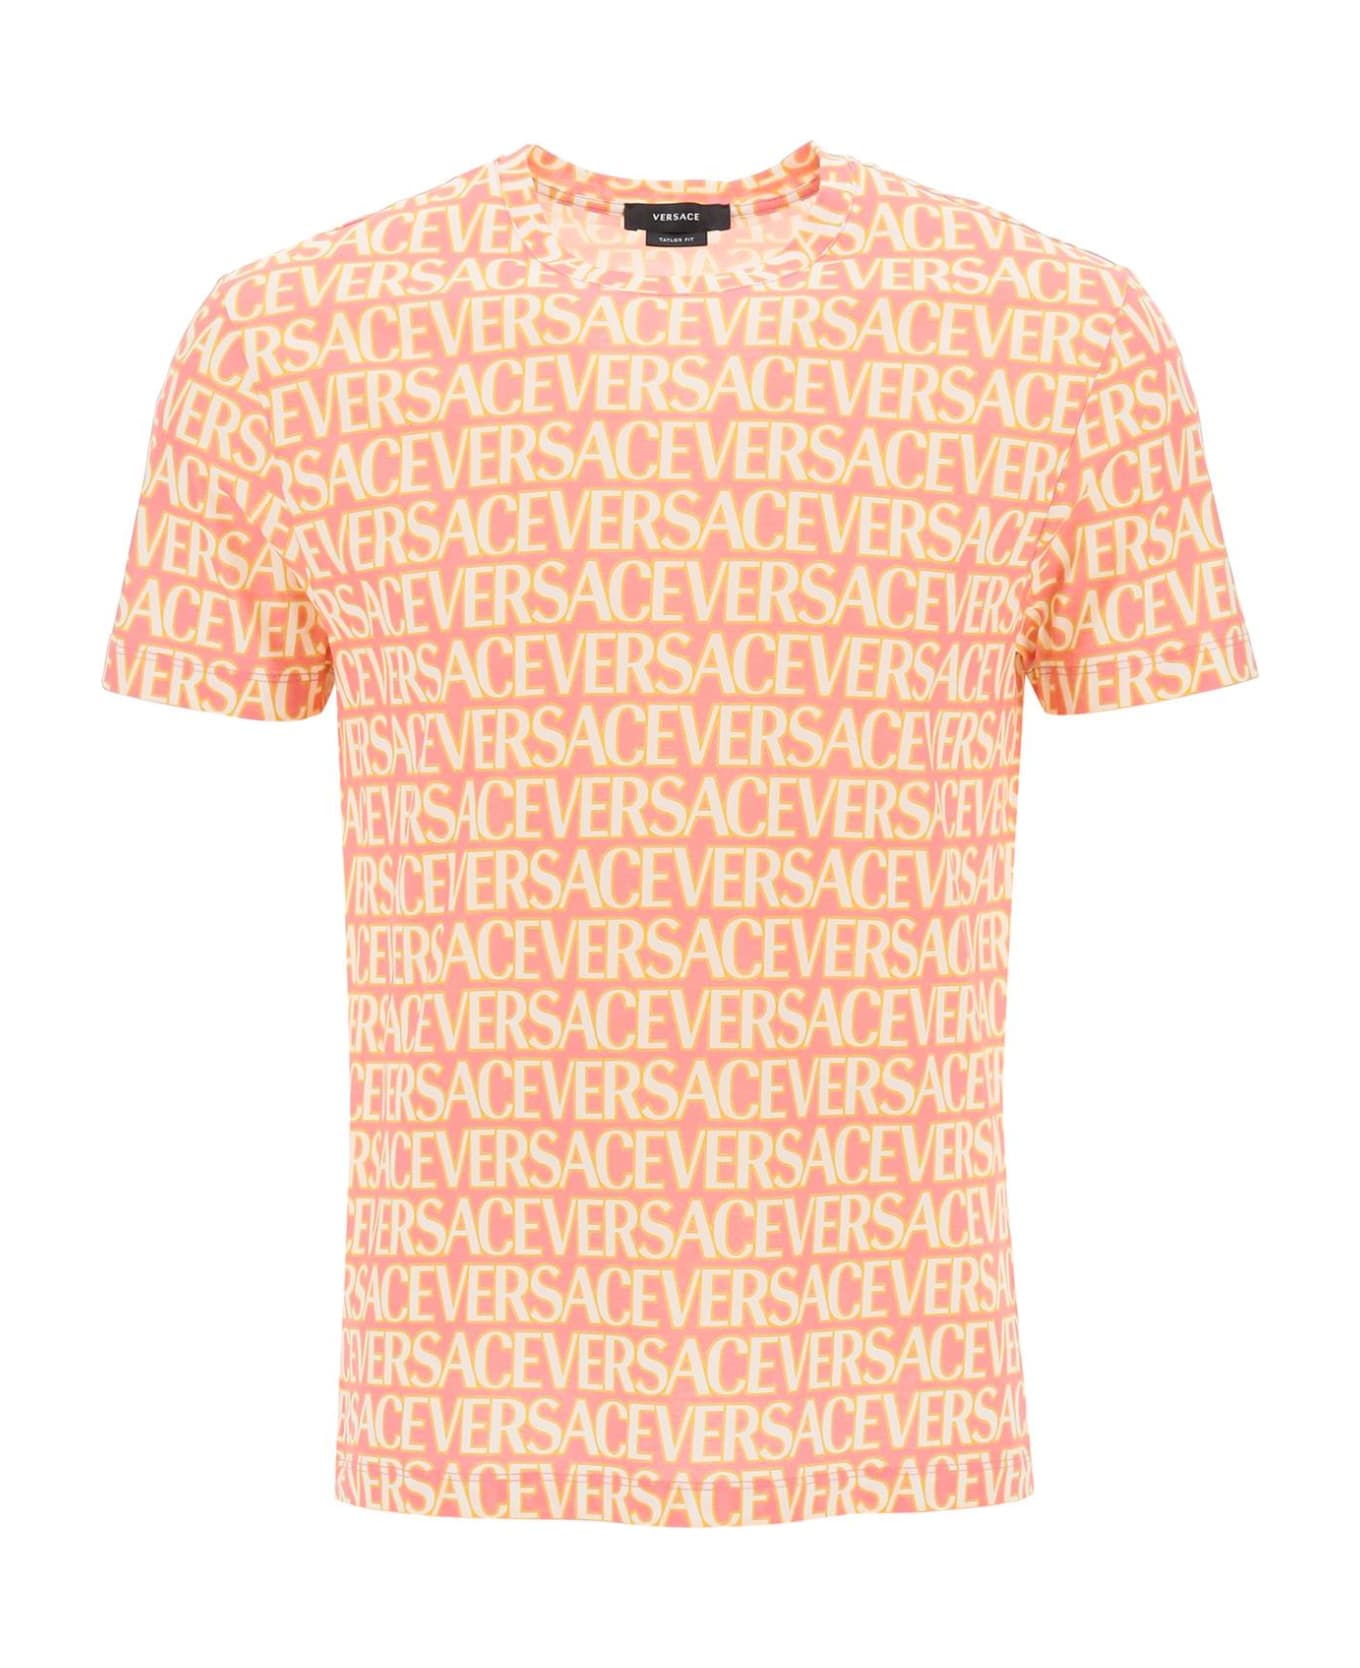 Versace Allover T-shirt - PINK IVORY (White)